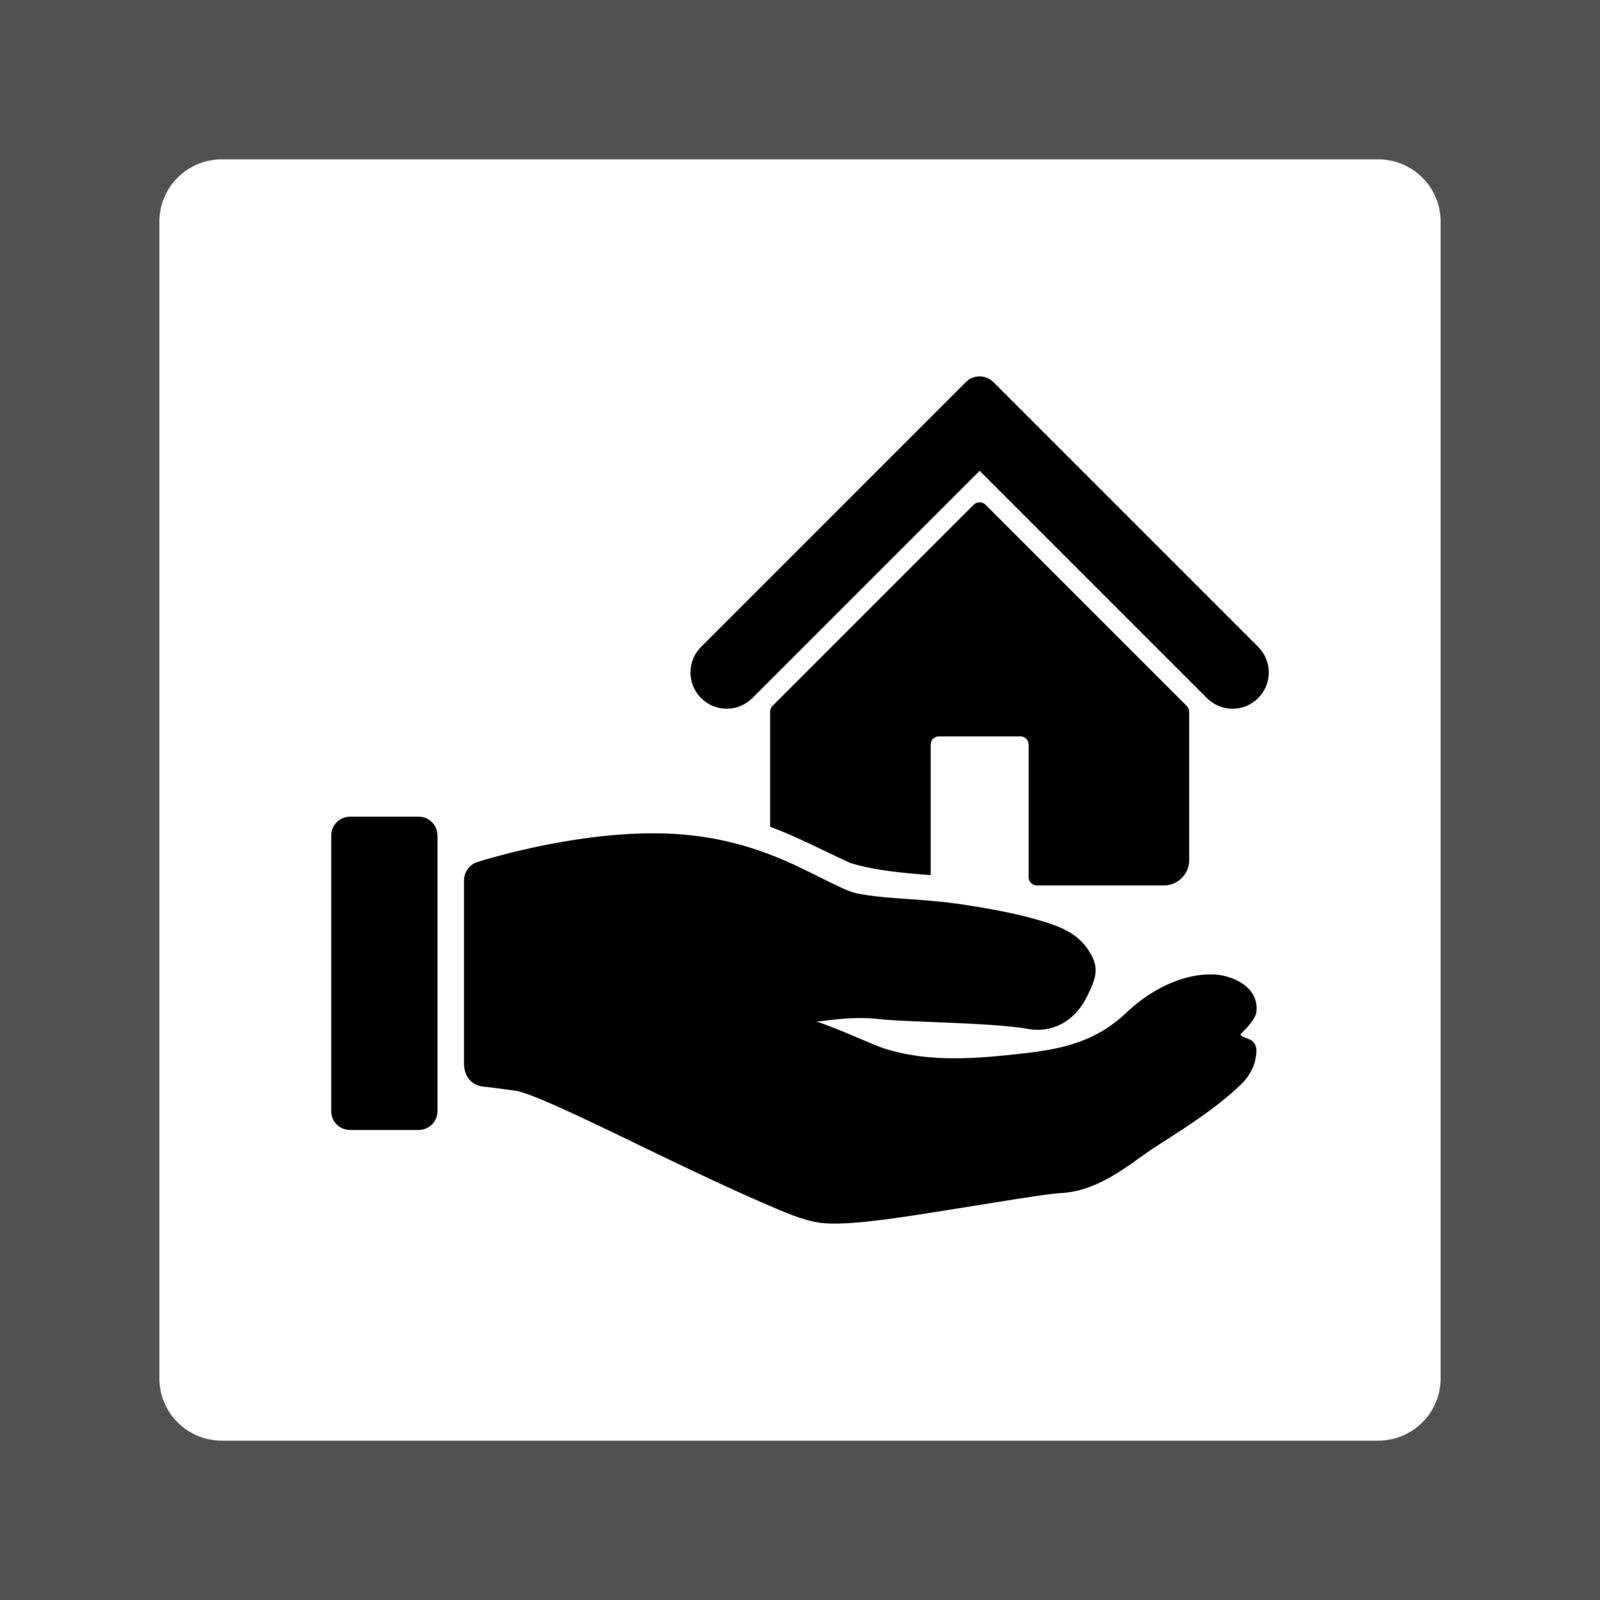 Real Estate vector icon. This flat rounded square button uses black and white colors and isolated on a gray background.